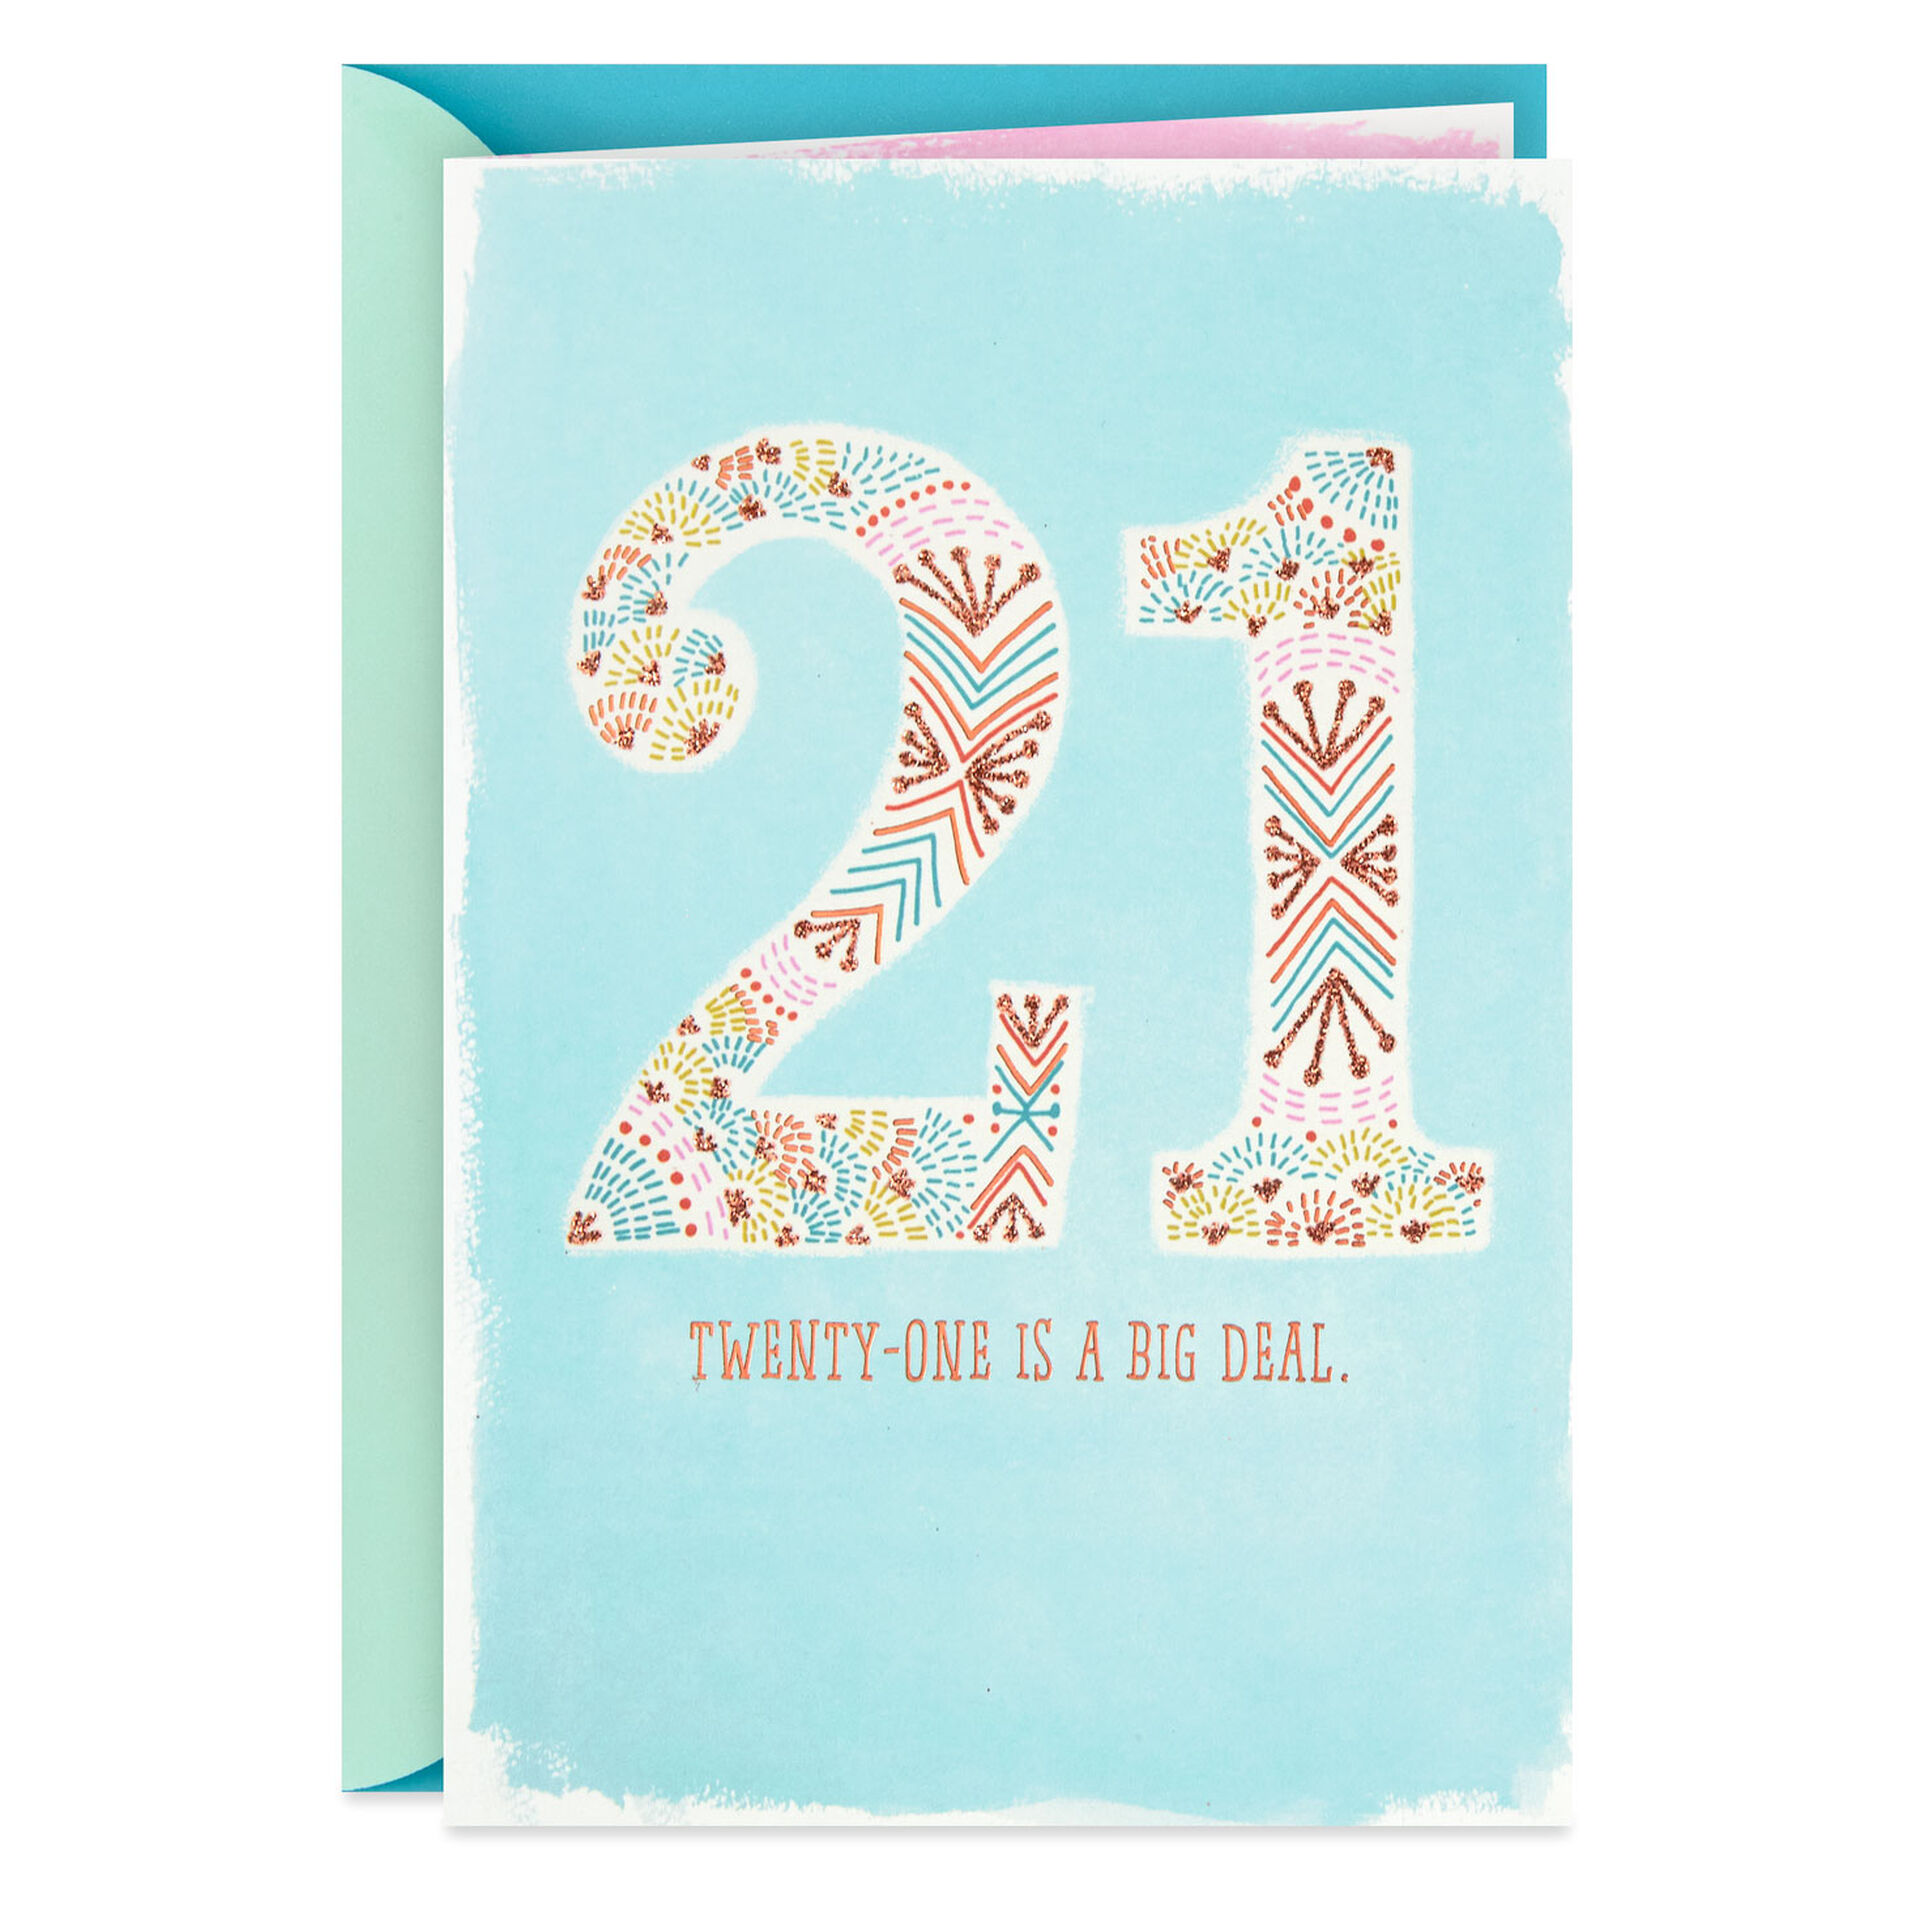 21ST BIRTHDAY CARD SON DAUGHTER GRANDSON GRANDDAUGHTER LARGER SIZE VERSES CUTE